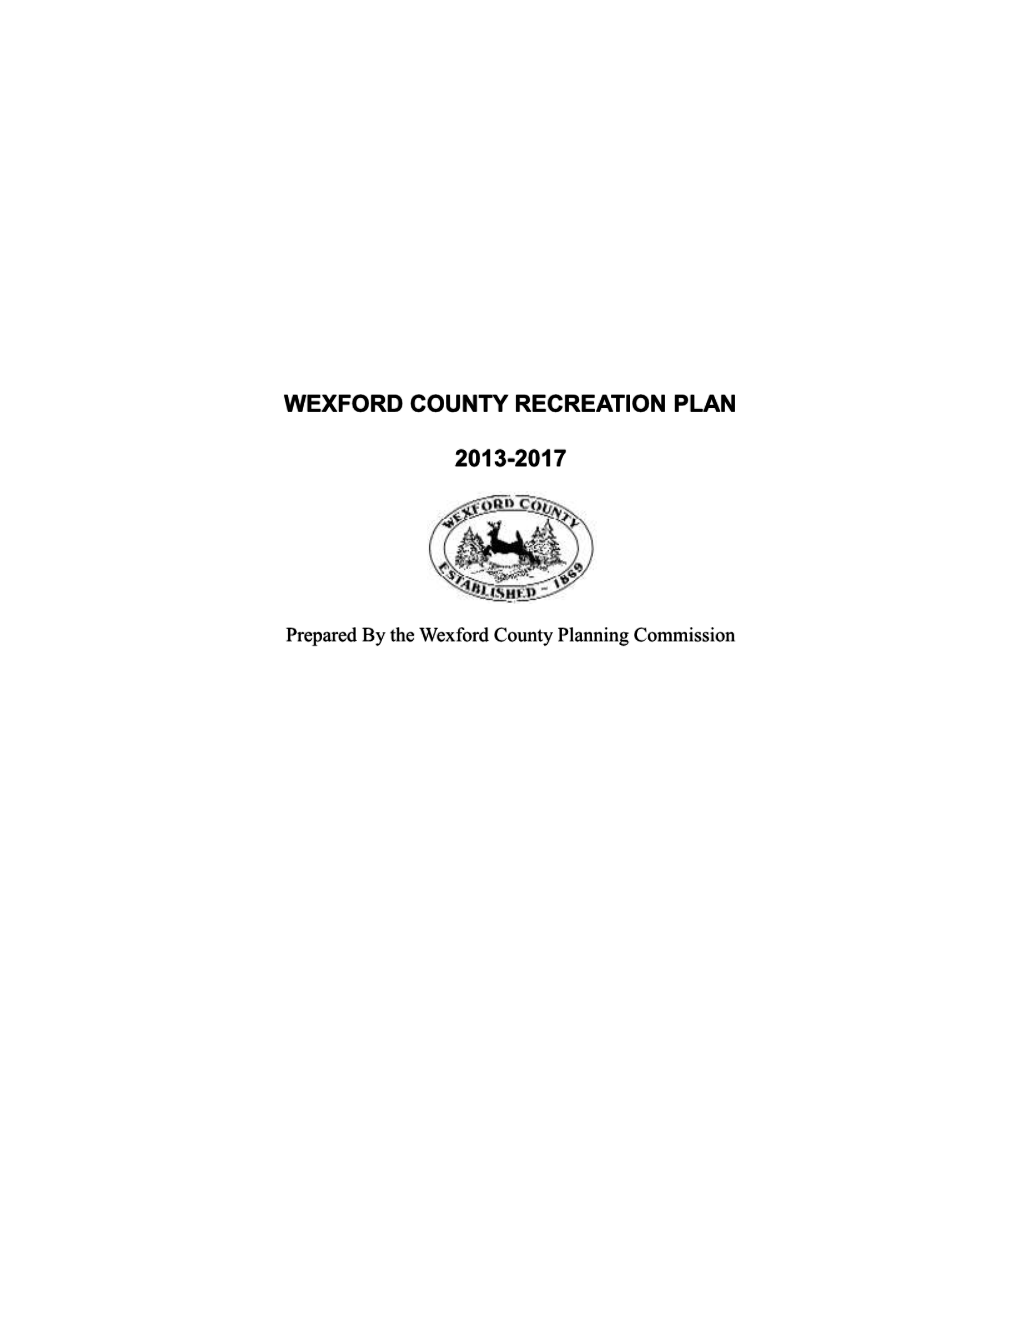 2013-17 Wexford County Recreation Plan